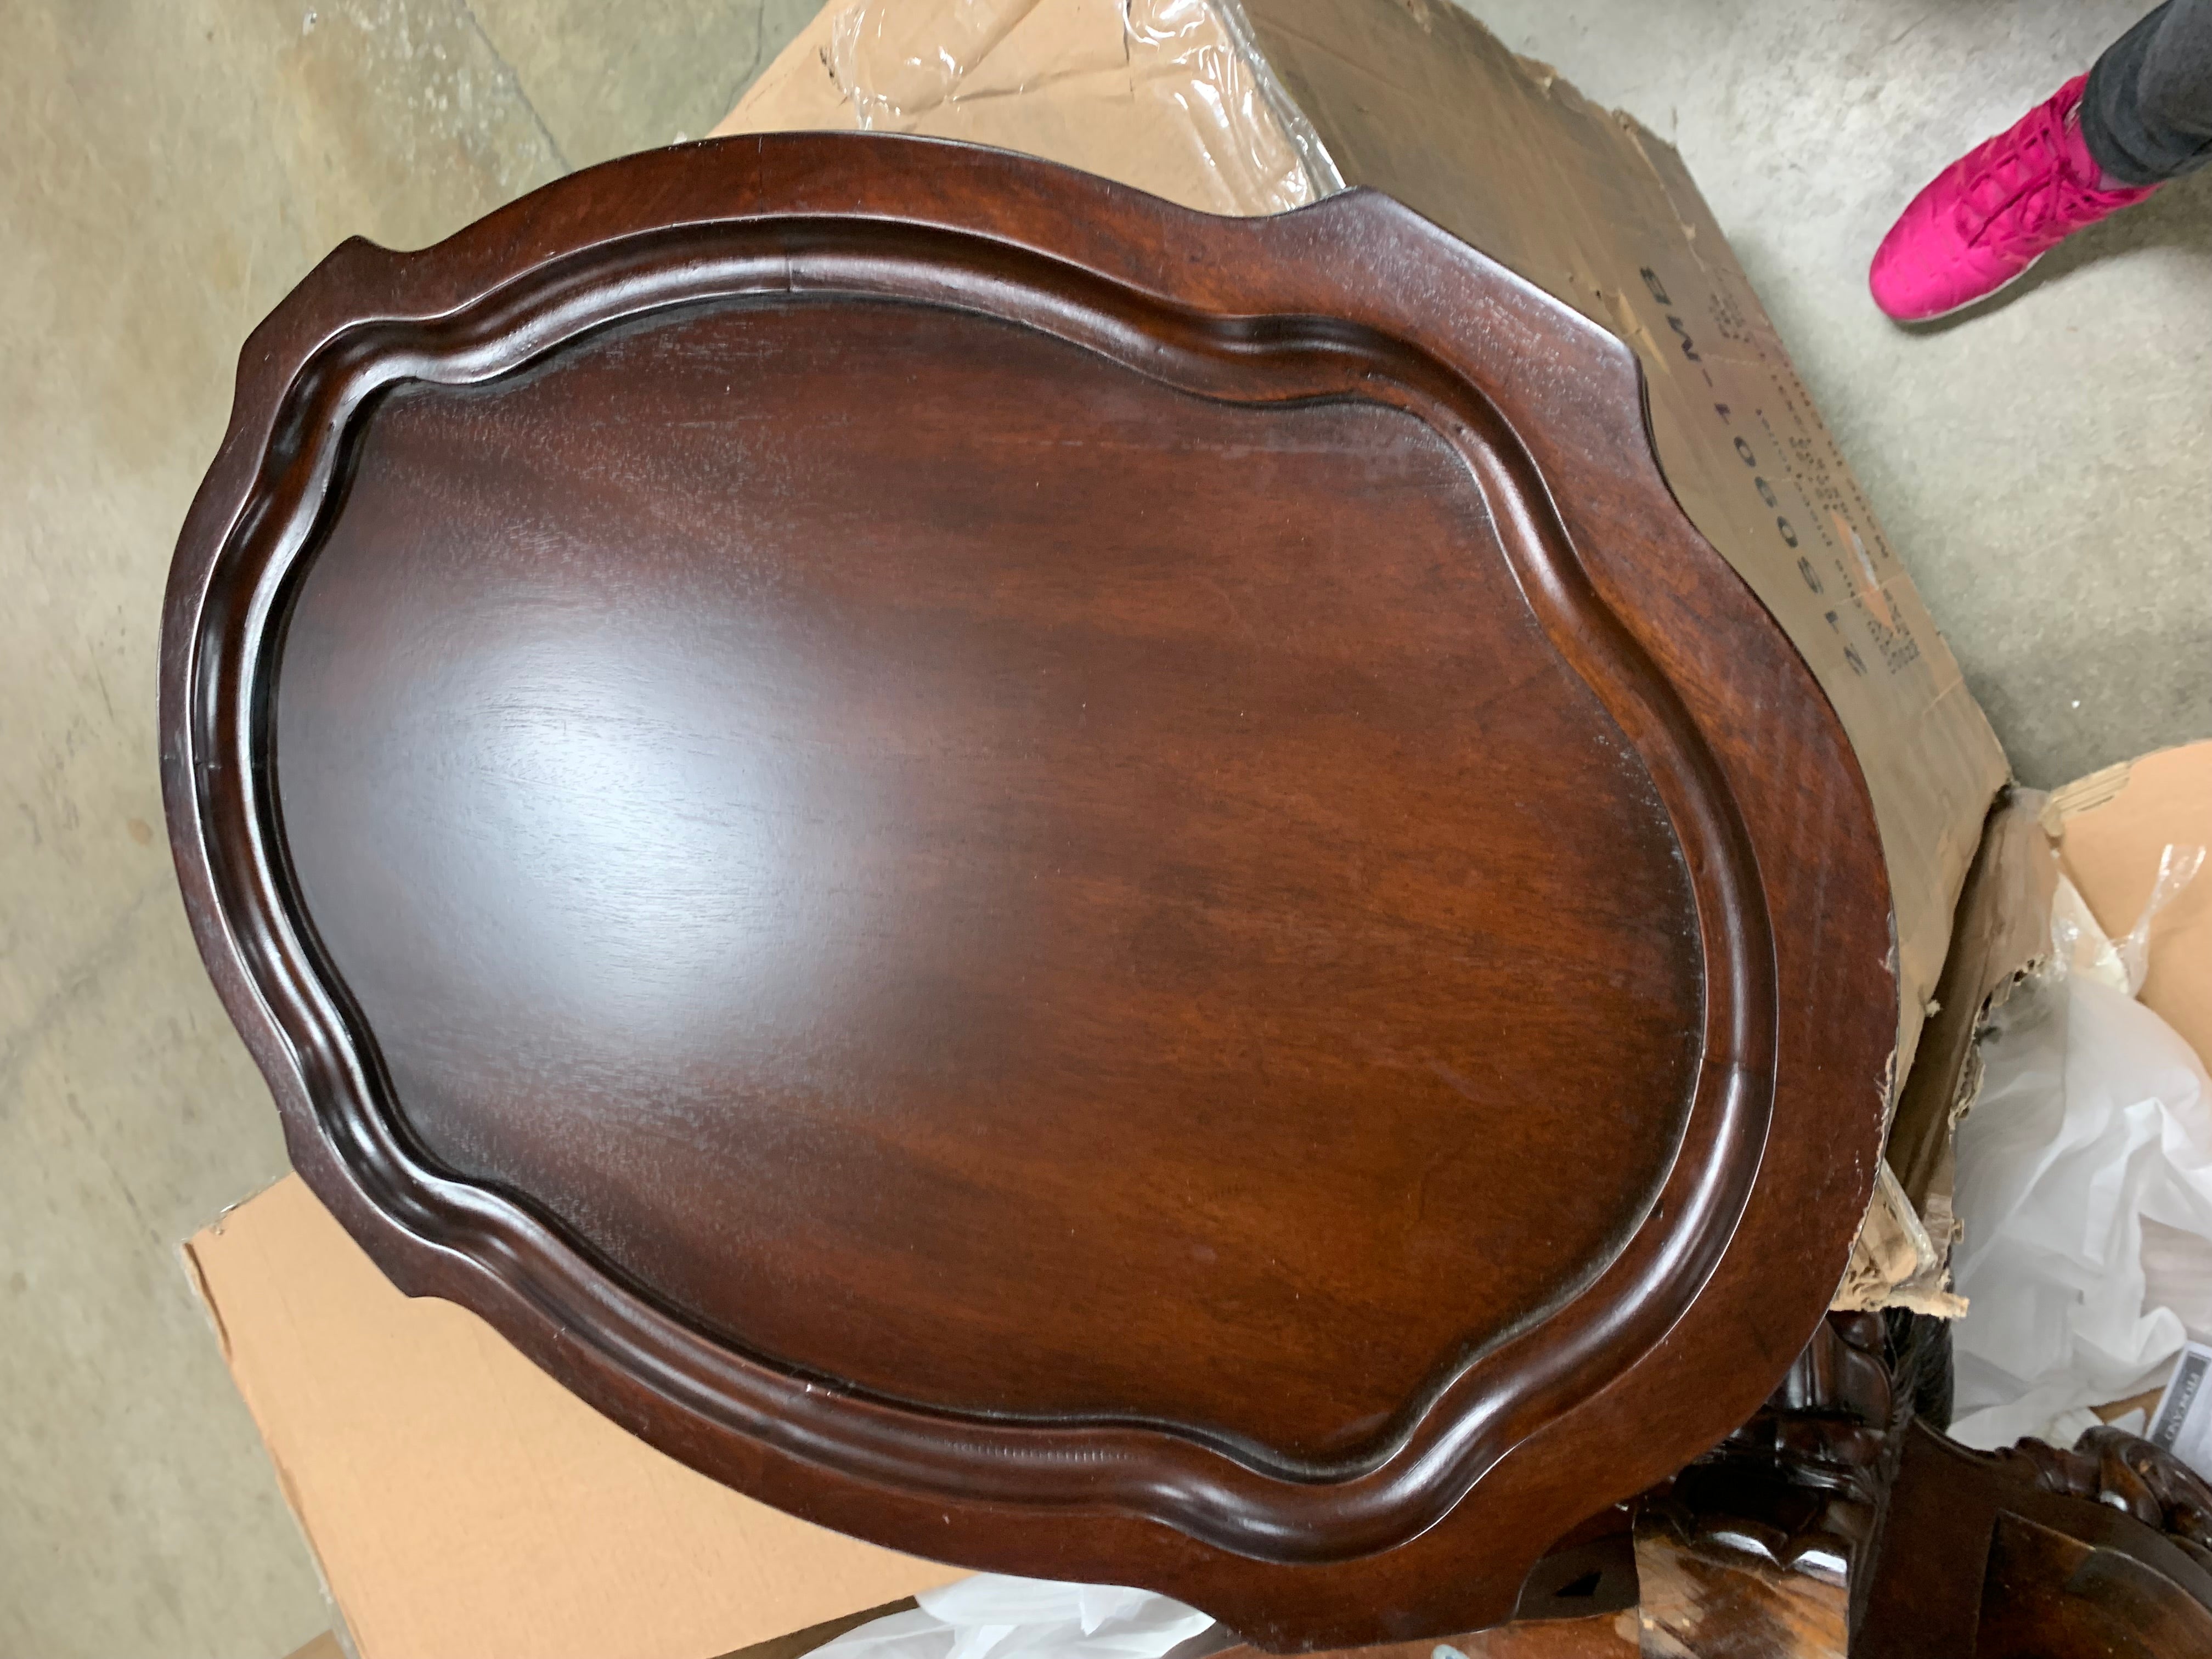 30.5'' Tall Solid Wood Tray Top End Table